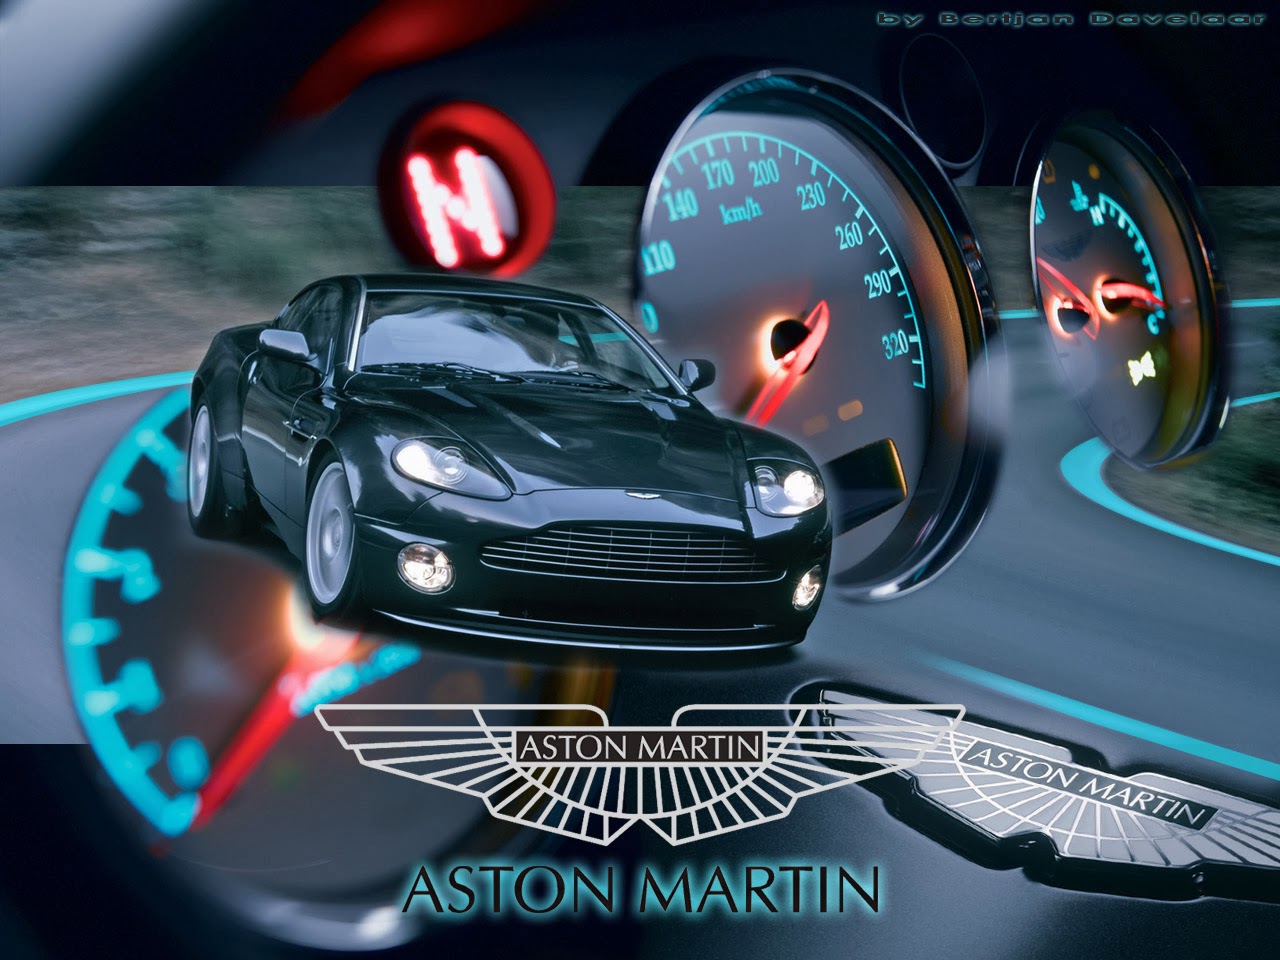 http://www.crazywallpapers.in/2014/02/aston-martin-vanquish-free-wallpapers.html